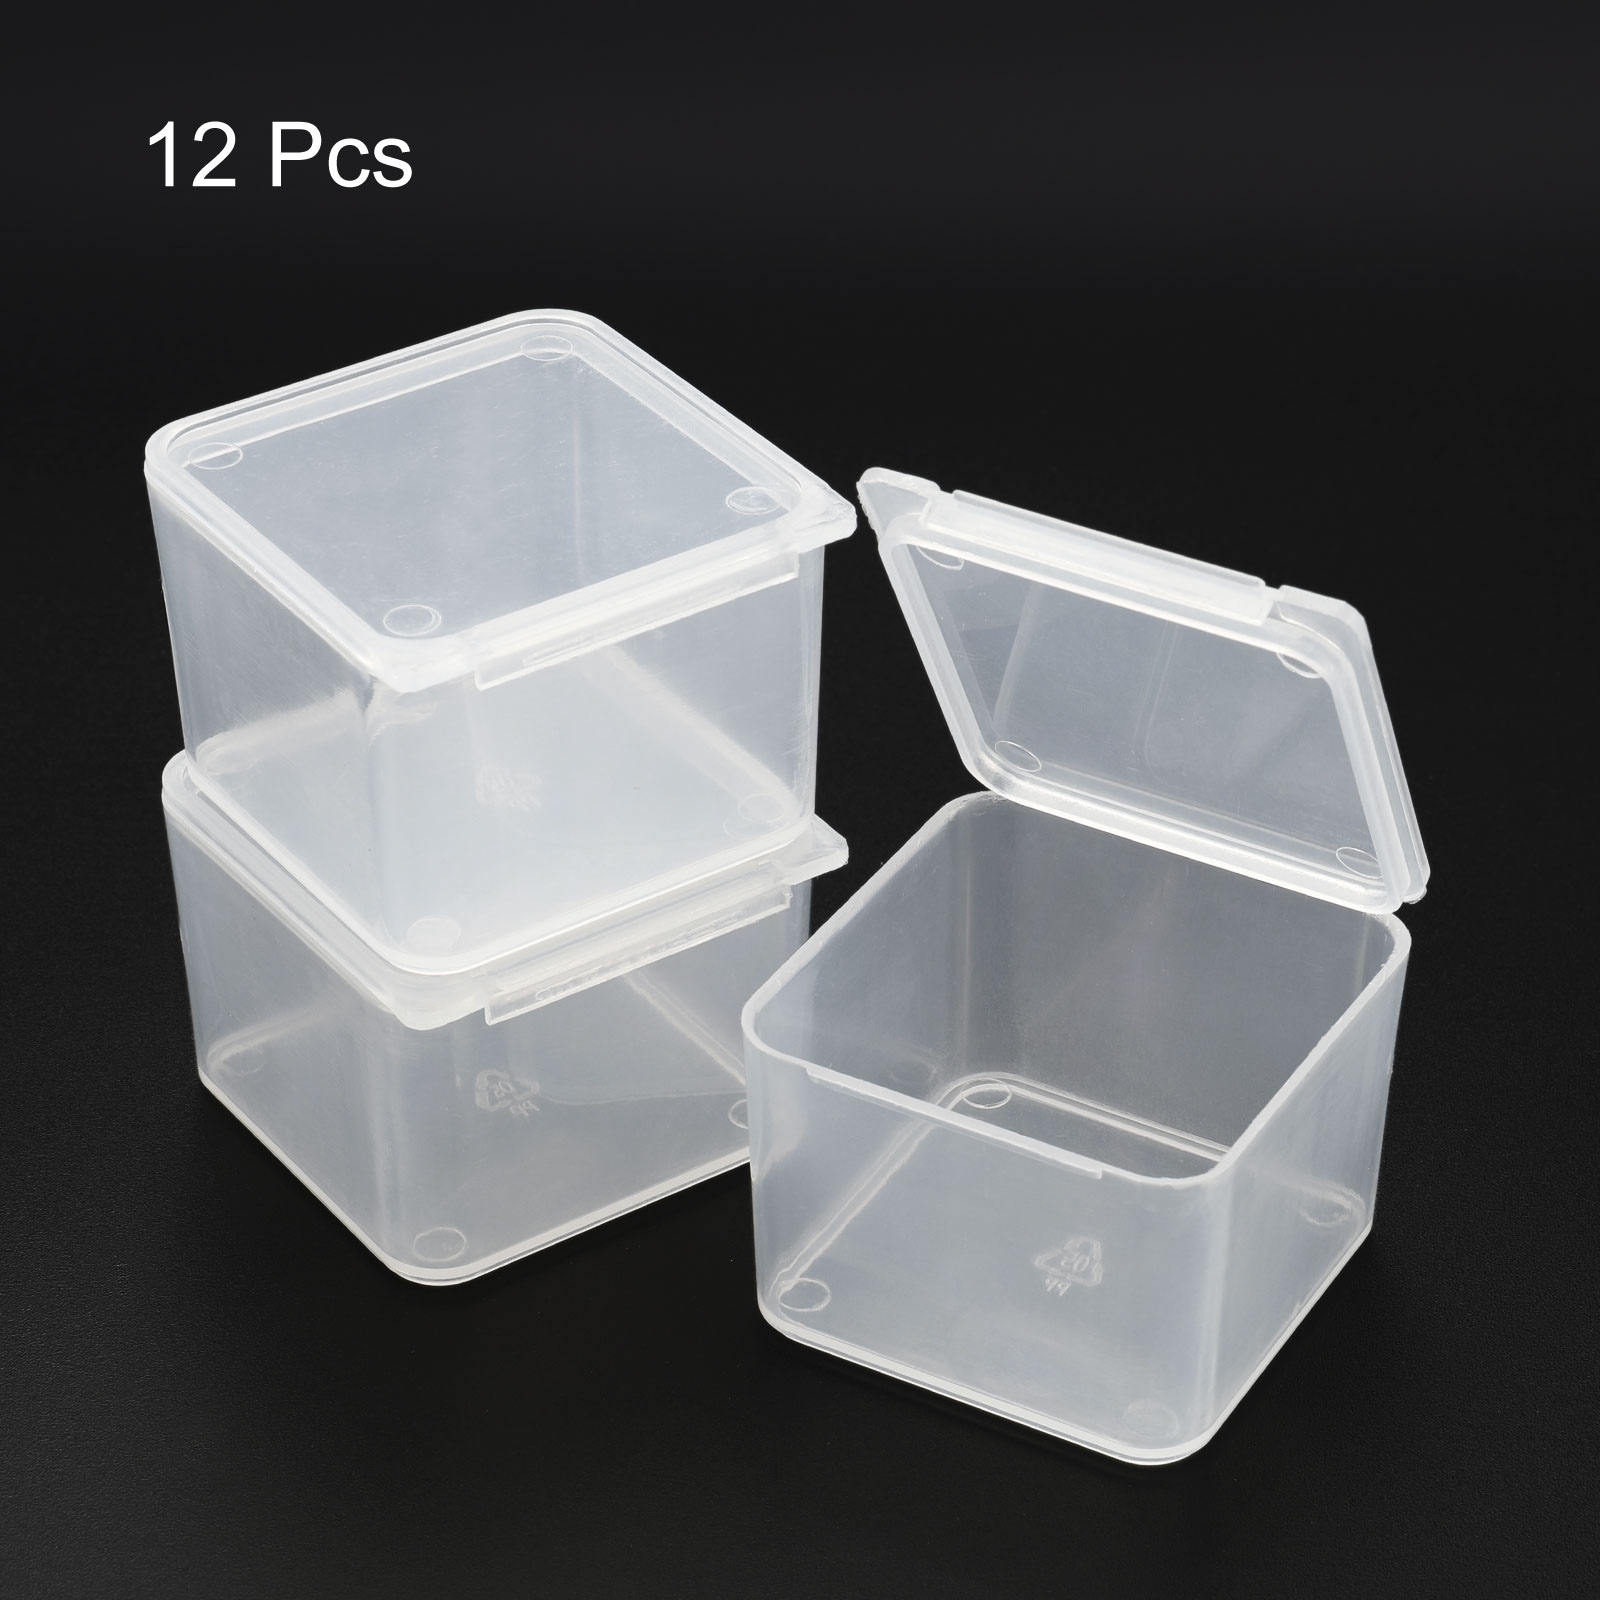 https://ak1.ostkcdn.com/images/products/is/images/direct/fa4cdce50d19b04b18d60983c8ddbccc419207da/12pcs-Clear-Storage-Container-with-Hinged-Lid-40x28mm-Plastic-Square-Craft-Box.jpg